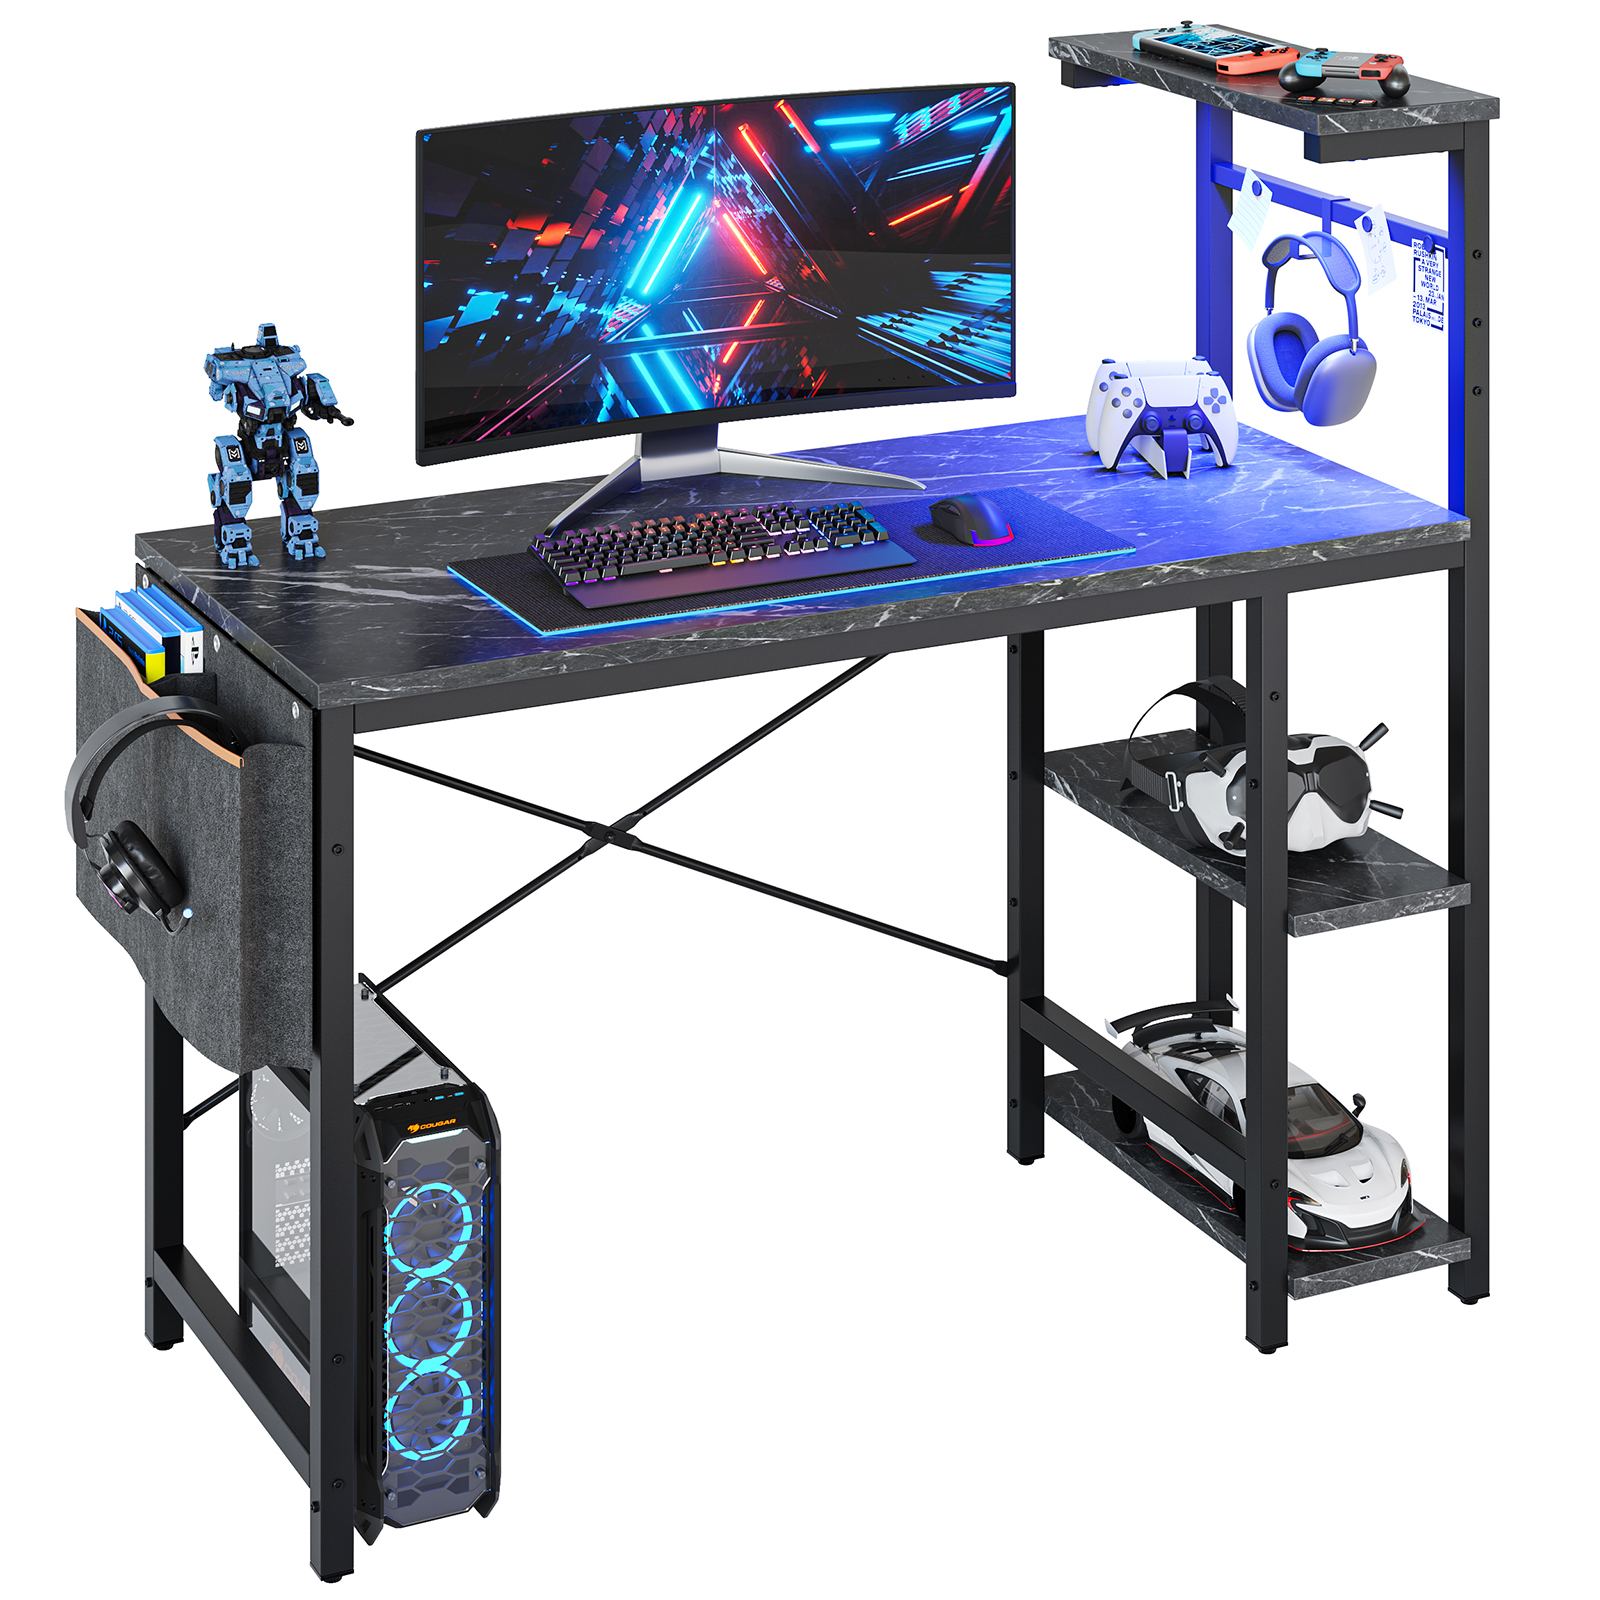 Bestier Reversible 44 inch Computer Desk with LED Lights Gaming Desk with 4 Tier Shelves Black Marble - image 3 of 7